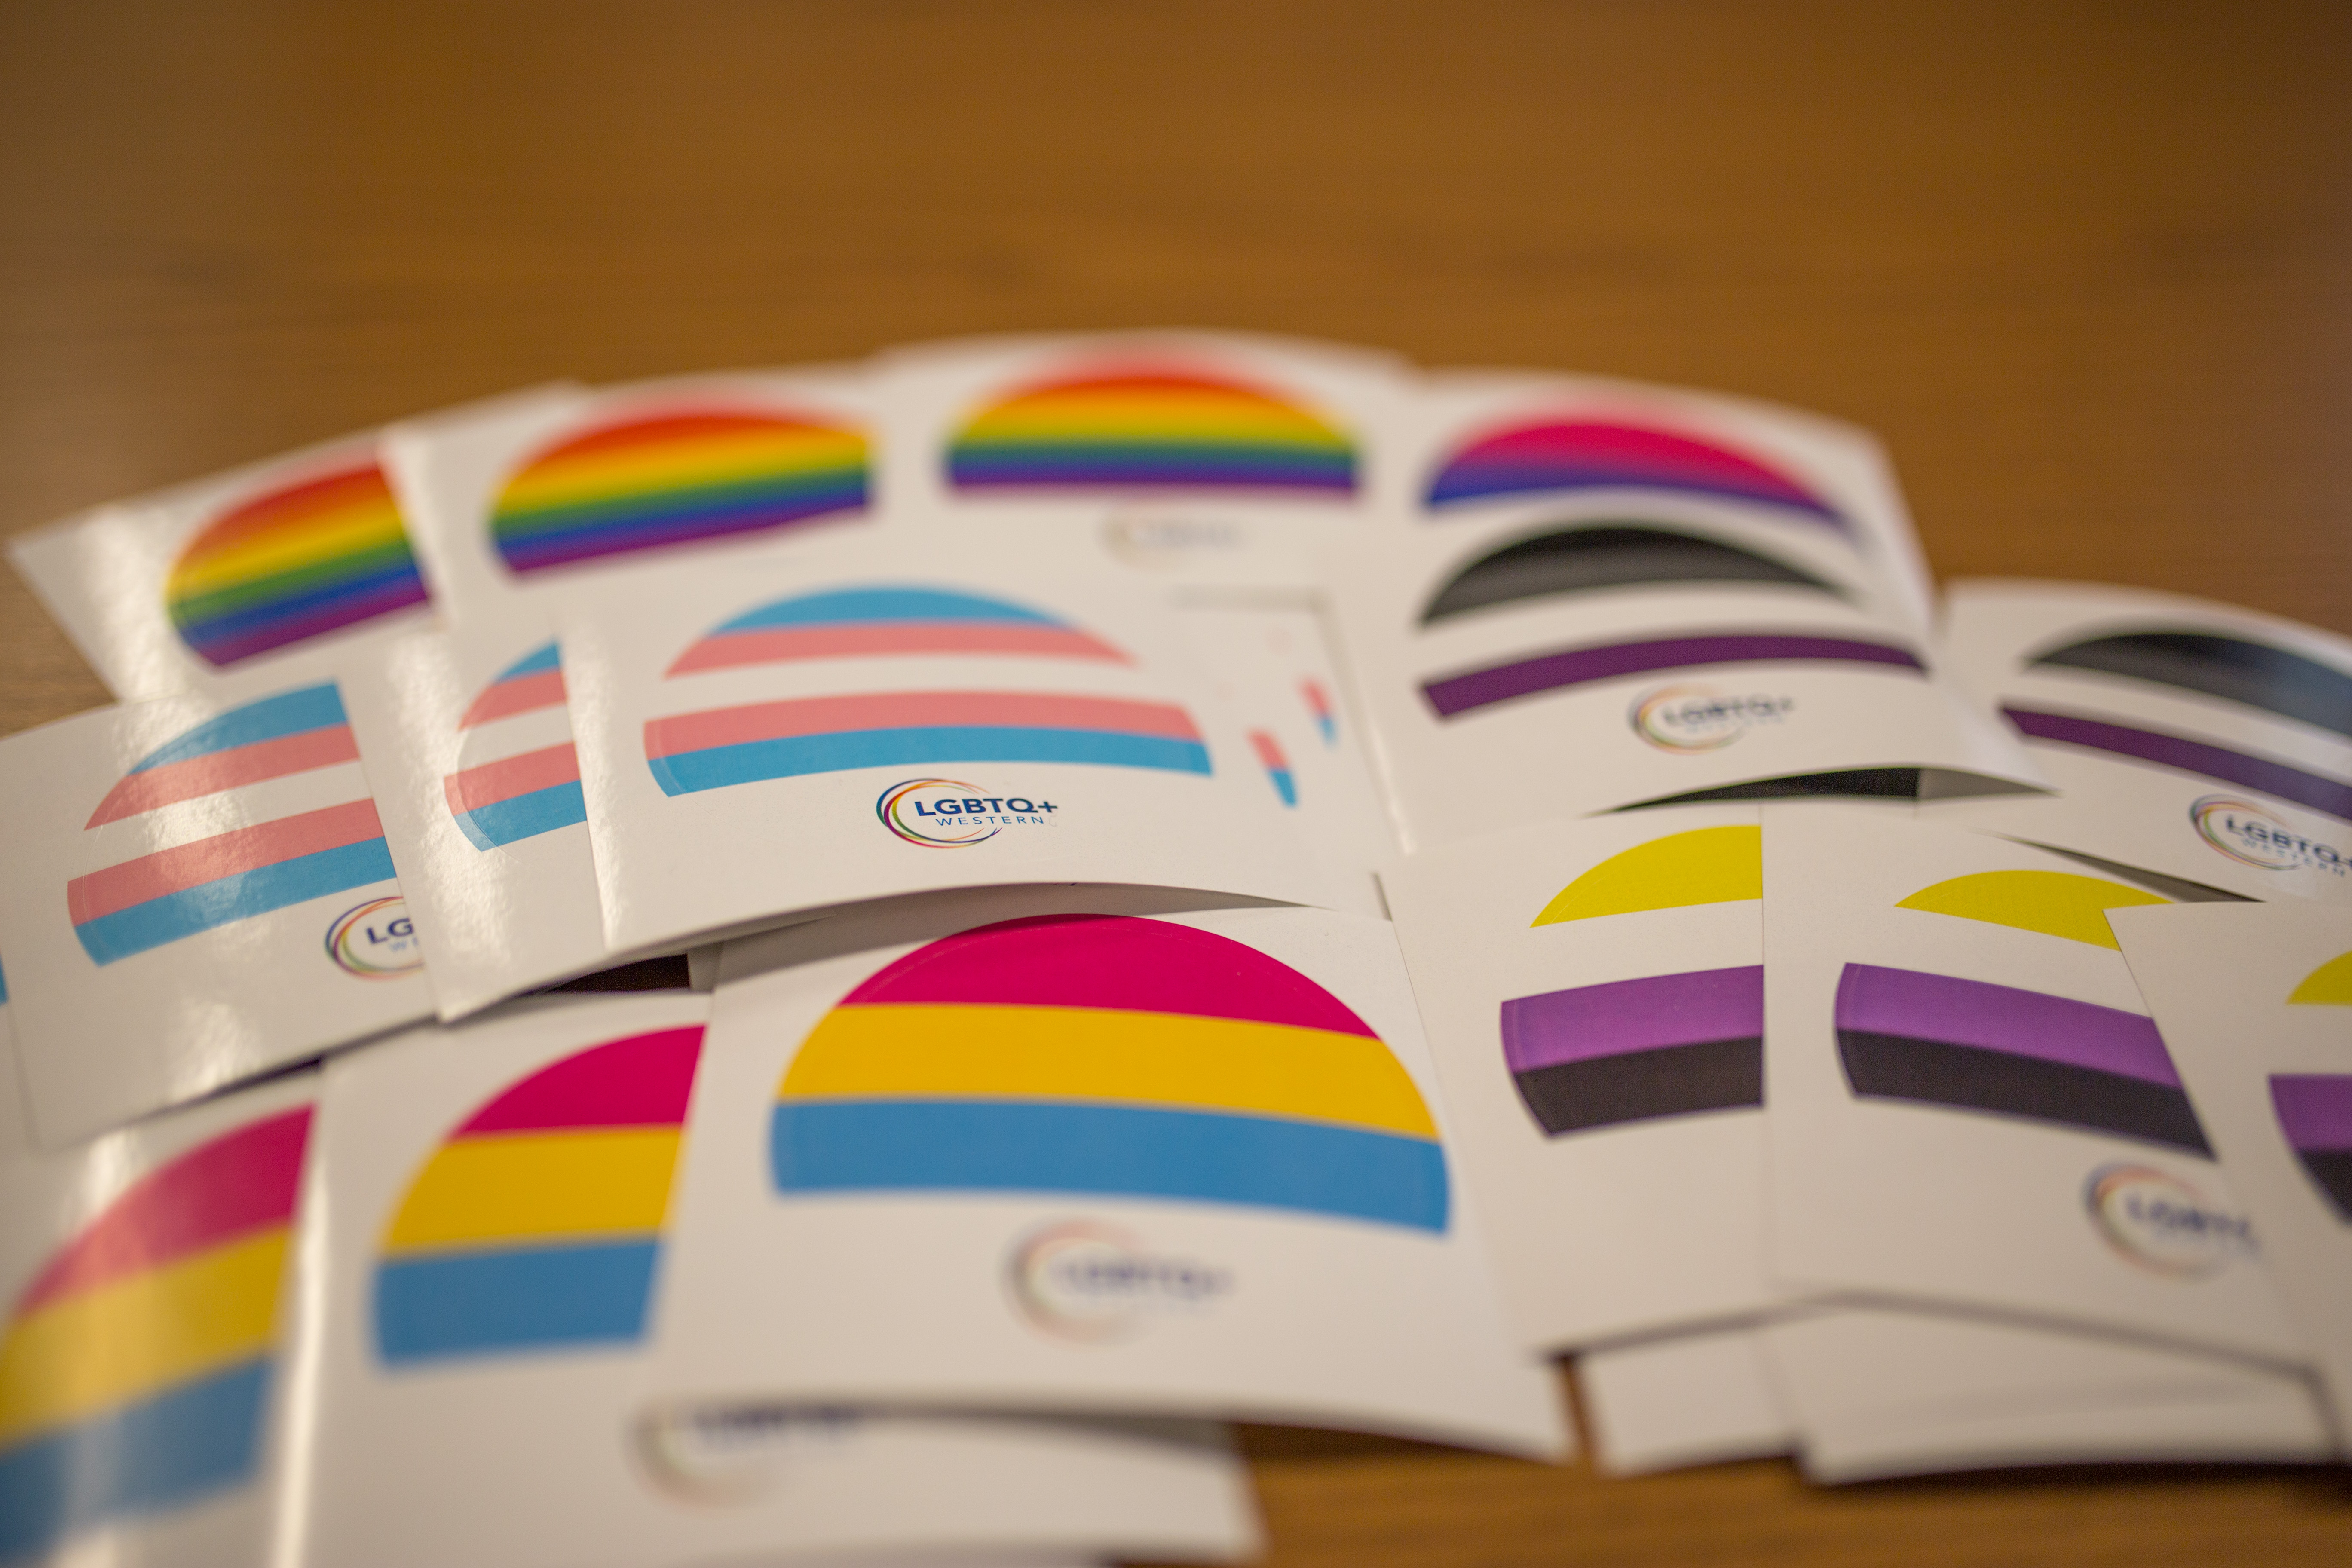 A collection of stickers Pride stickers with the LGBTQ+ Western logo